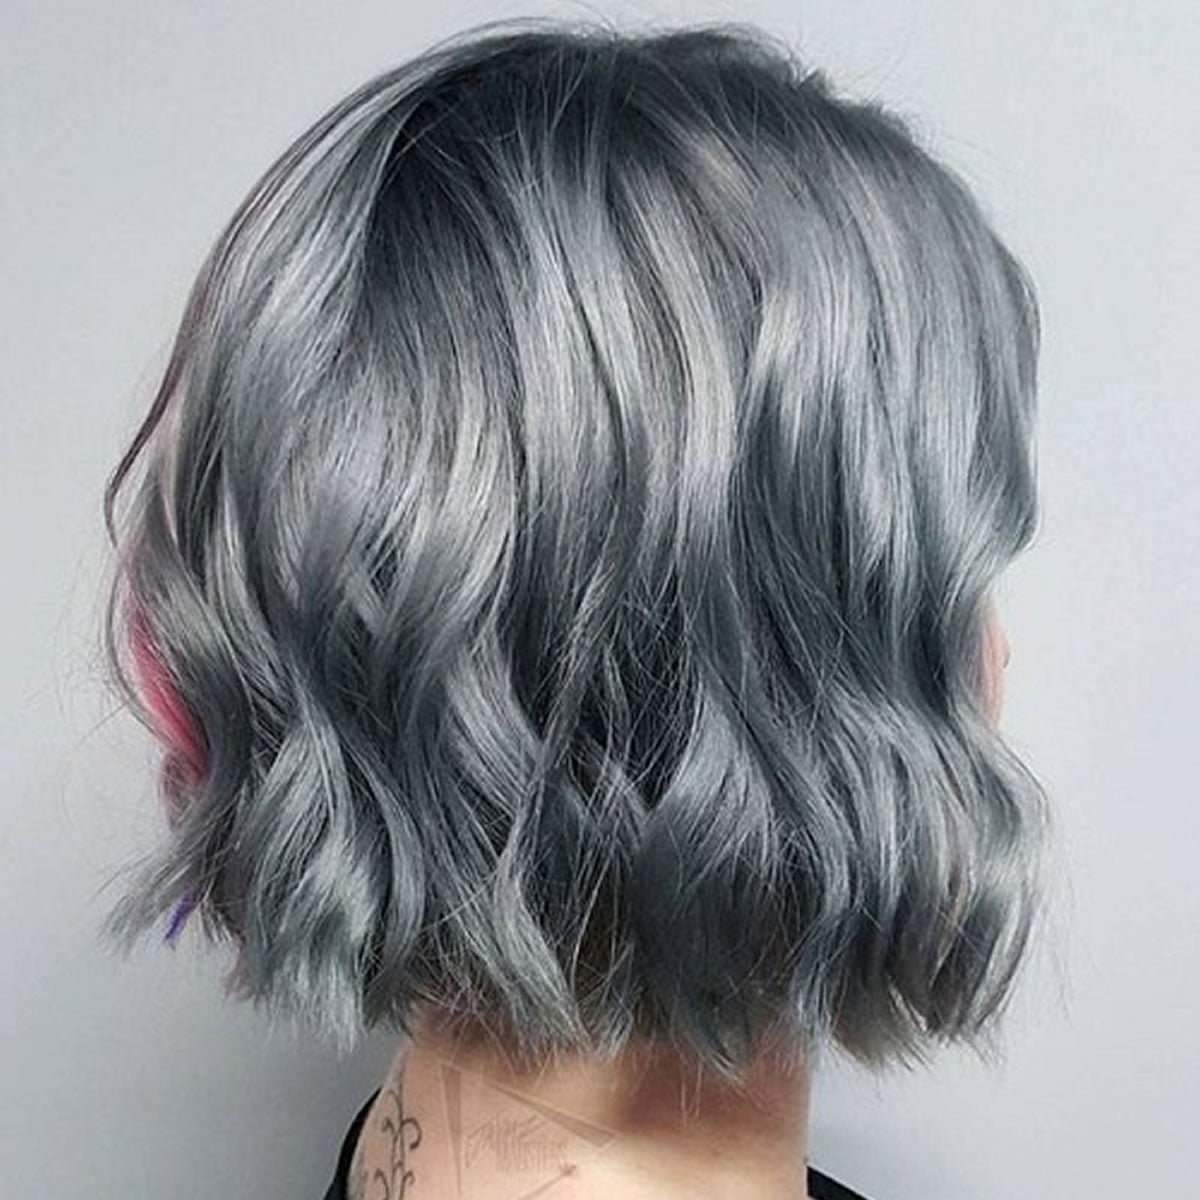 Grey Hair Trend 20 Glamorous Hairstyles For Women 2018 Page 4